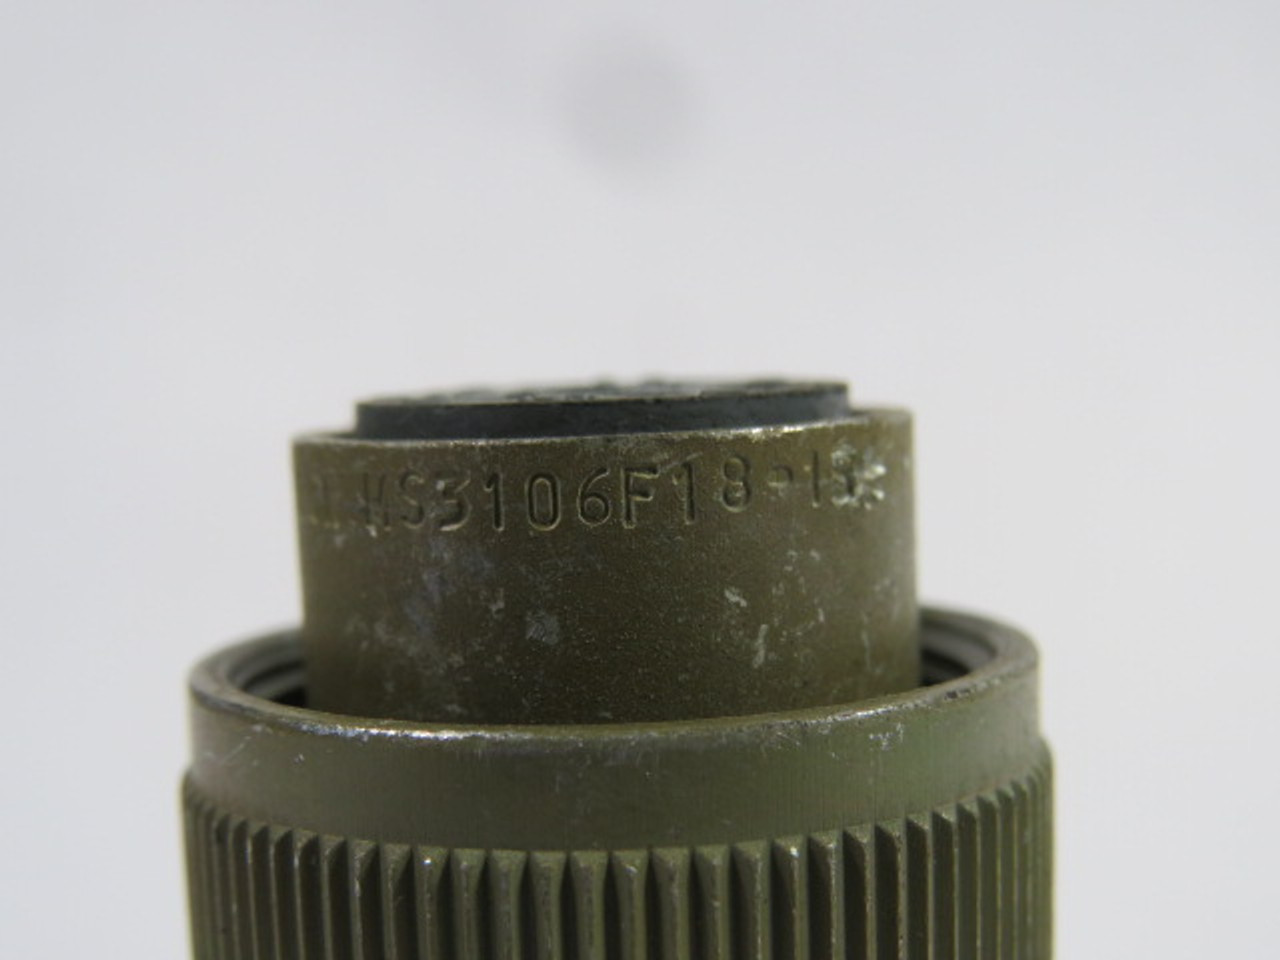 Itt Cannon MS3106F18-1S Circular Connector 10-Contacts USED